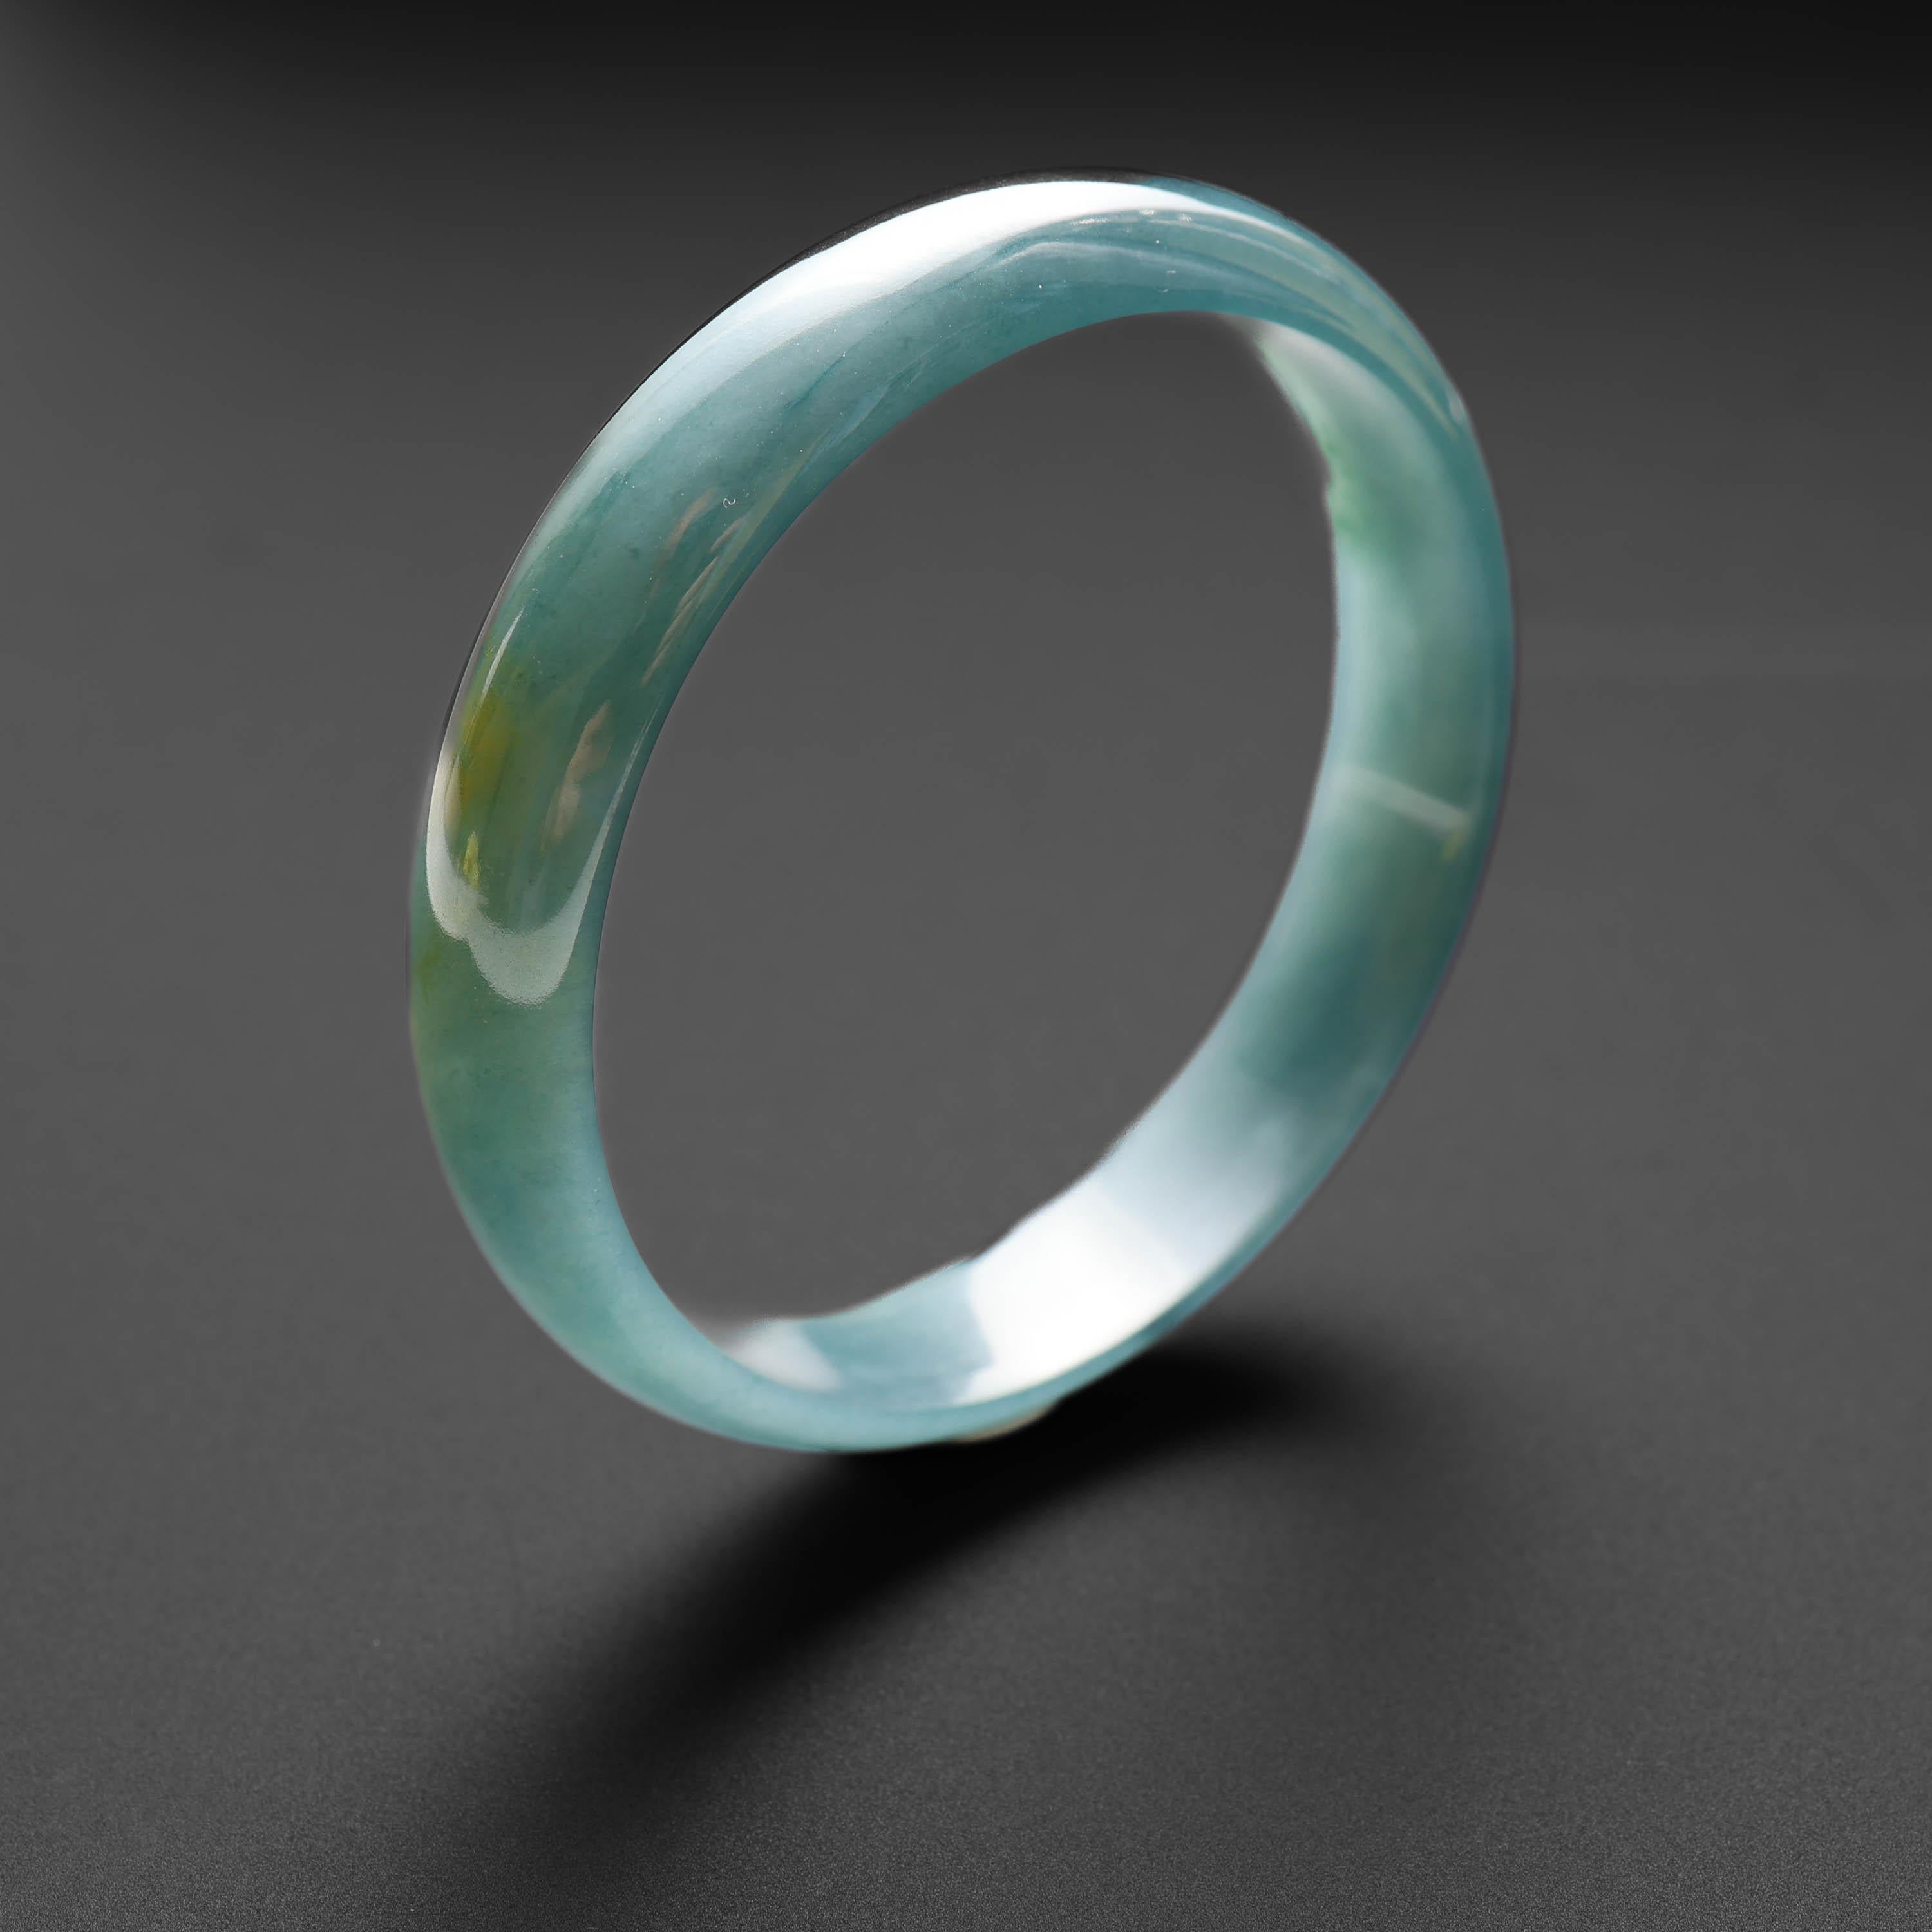 This hand-carved half-round jade bangle was created from translucent bluish-green untreated jadeite. It has an inner diameter of 57mm, so it will fit a small to average-sized wrist. Incredibly translucent and luminous, jadeite jade bangle is simply